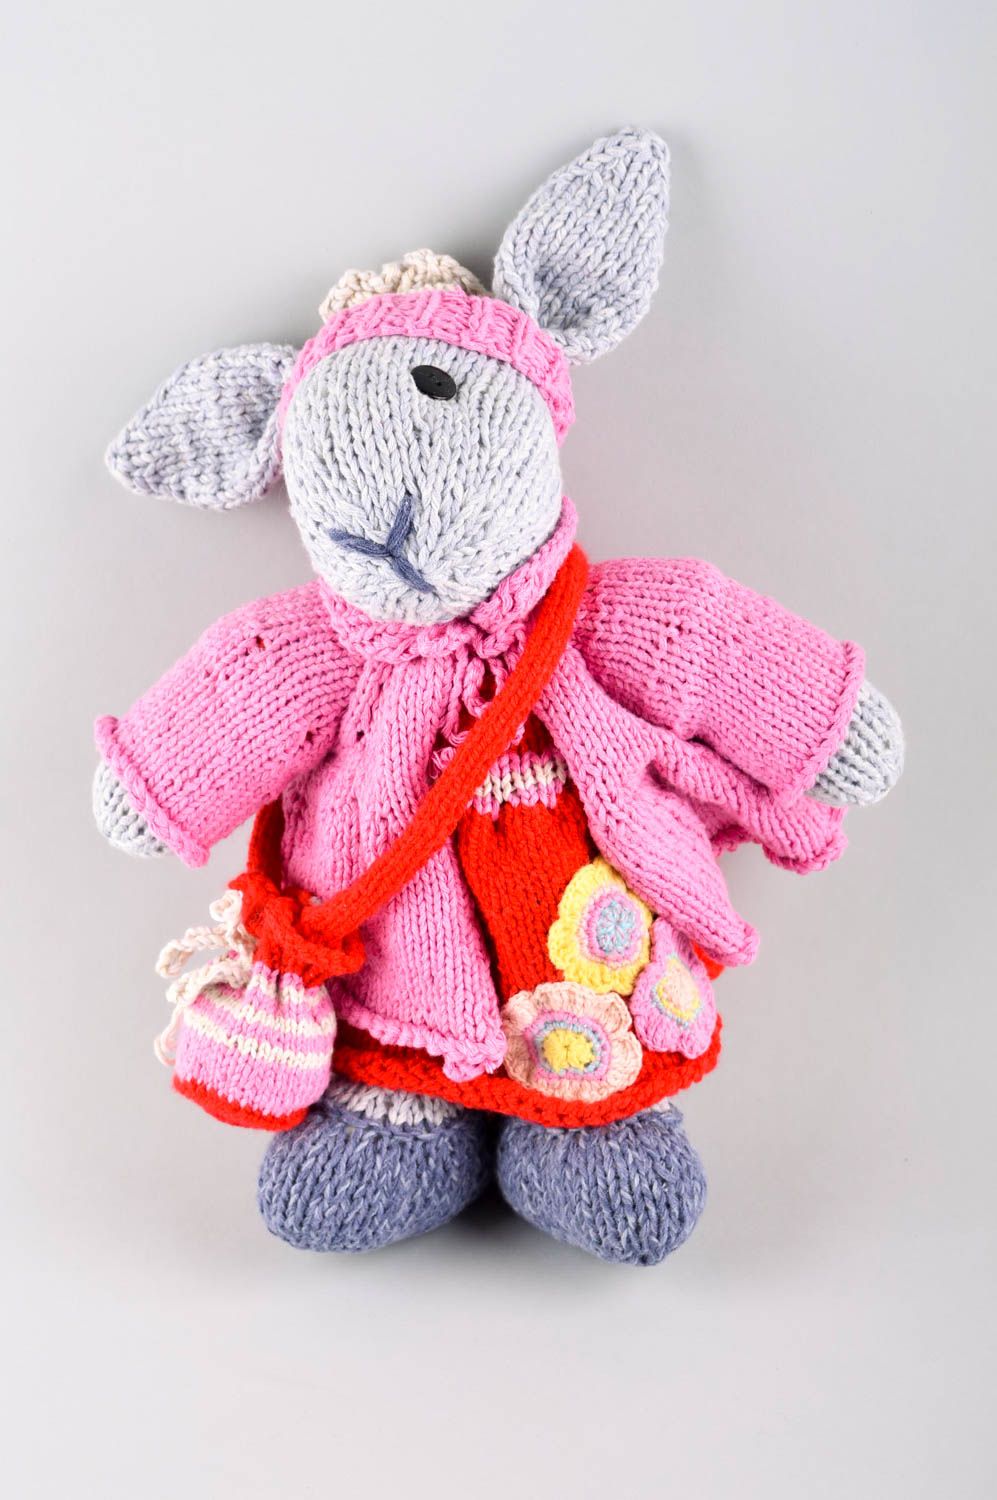 Handmade unusual soft toy textile toys for kids pink knitted rabbit toy photo 2